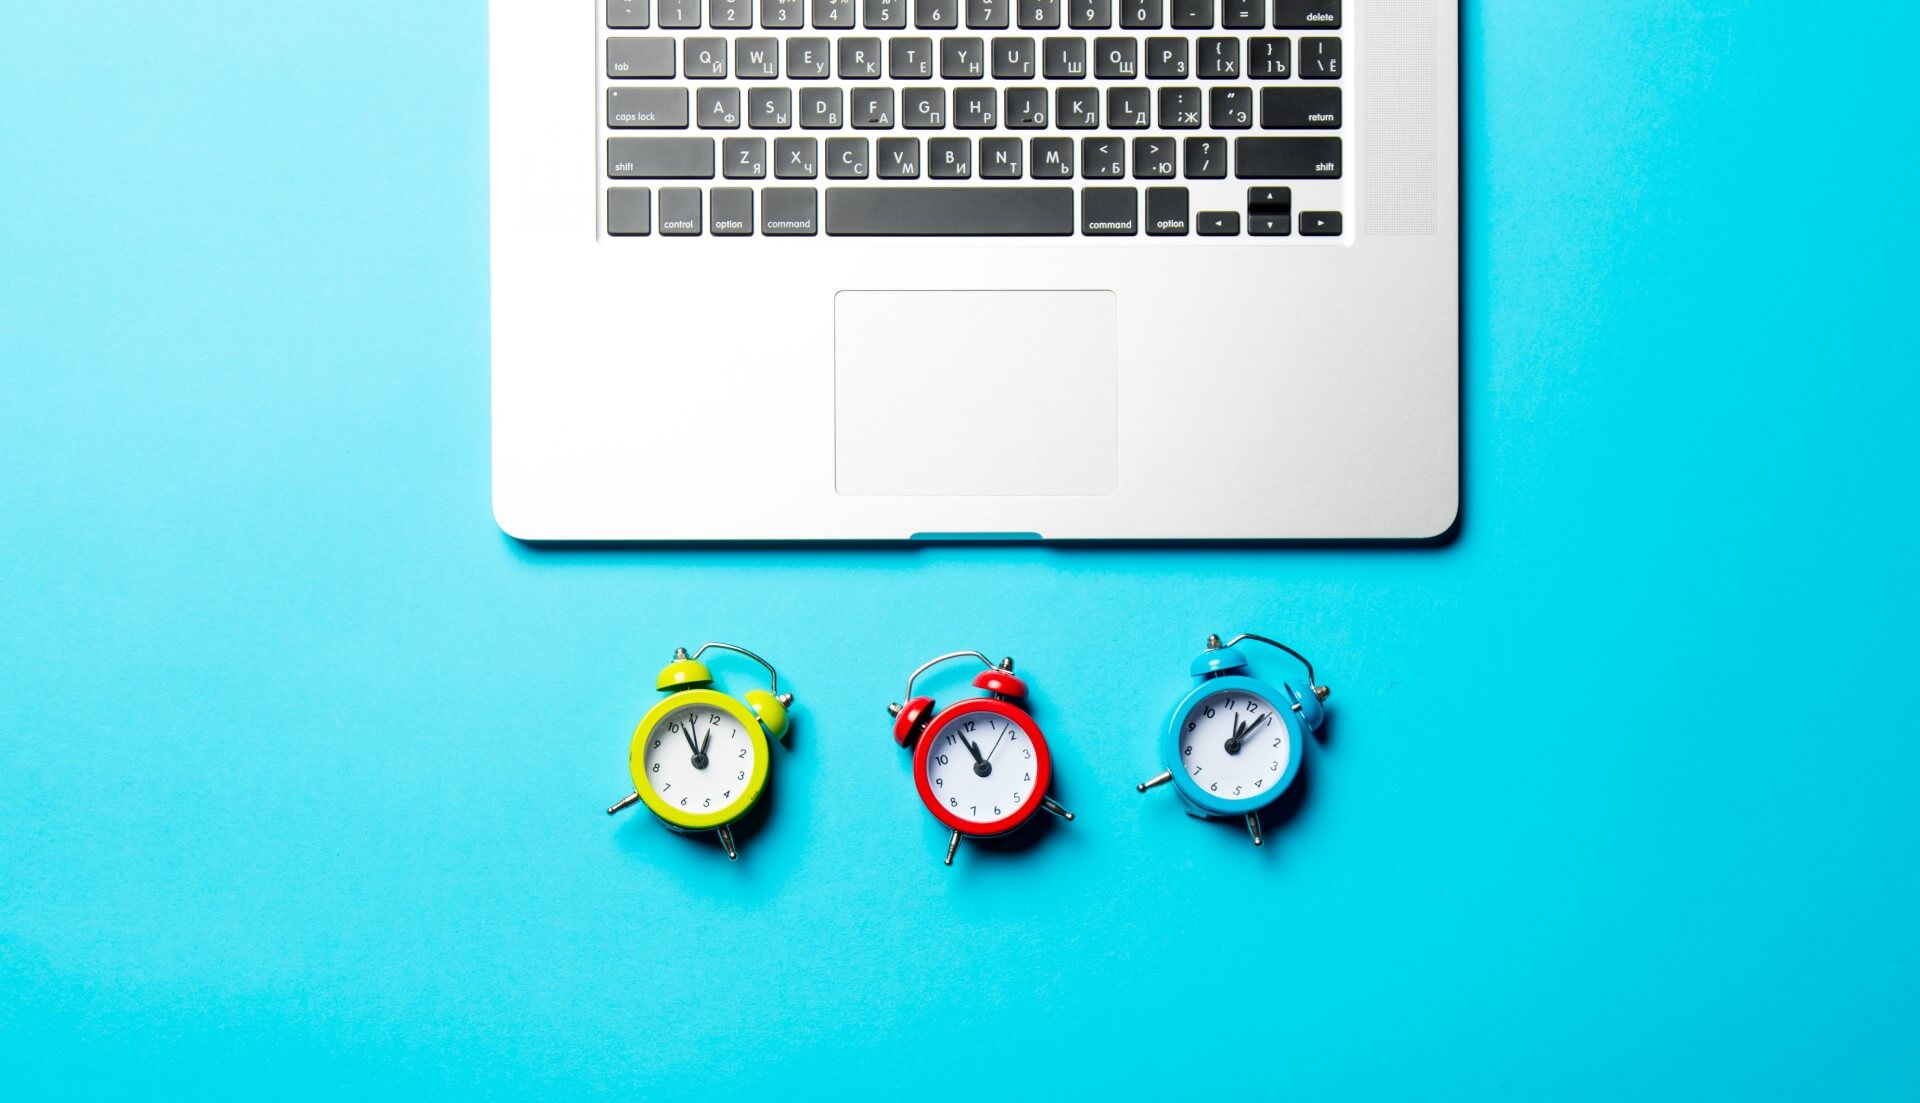 3 small colorful alarm clocks under a laptop